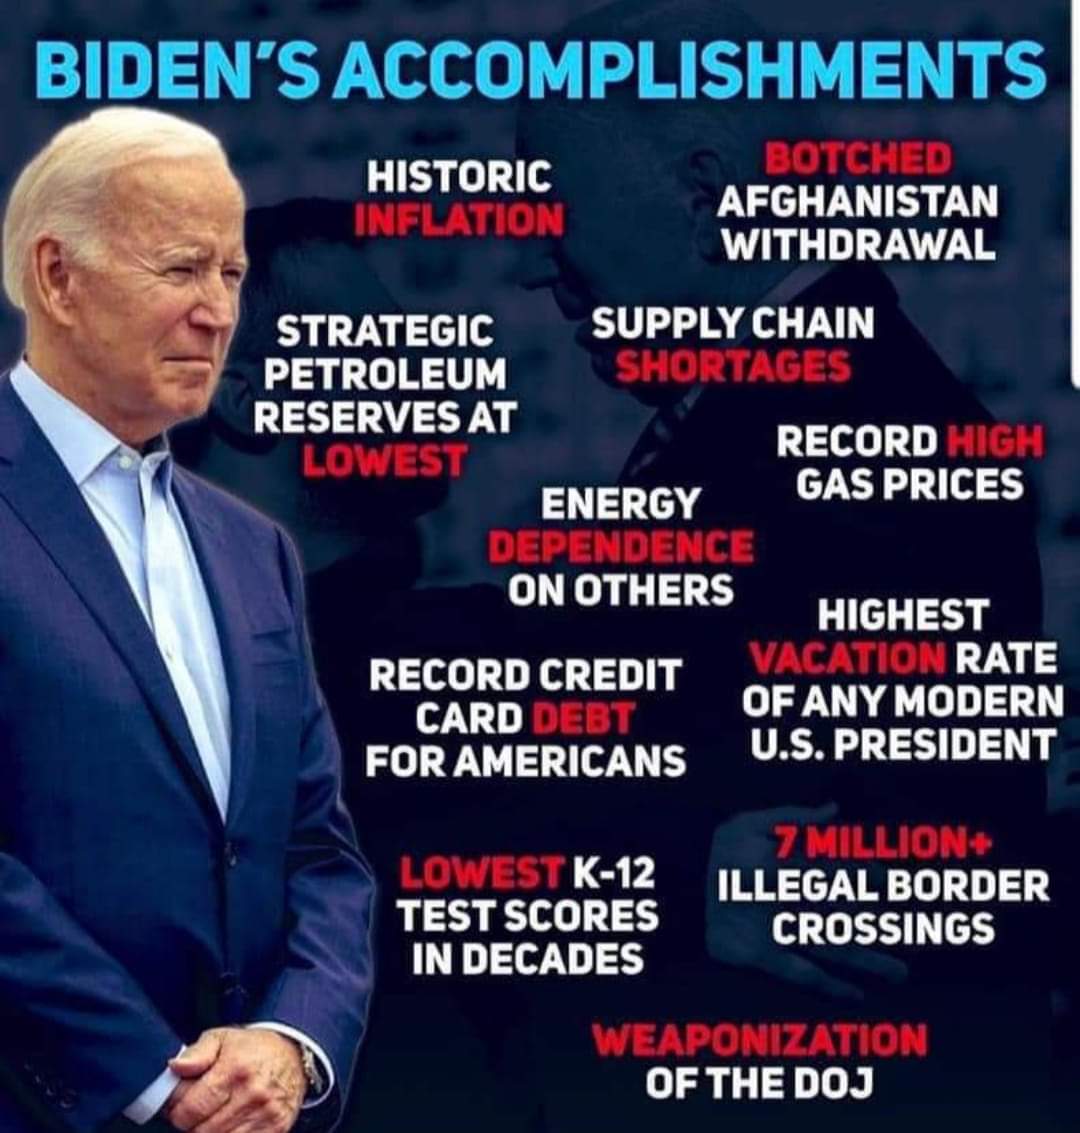 Biden's many 'accomplishments.' Clearly, this man is out to destroy America. Prove me wrong.